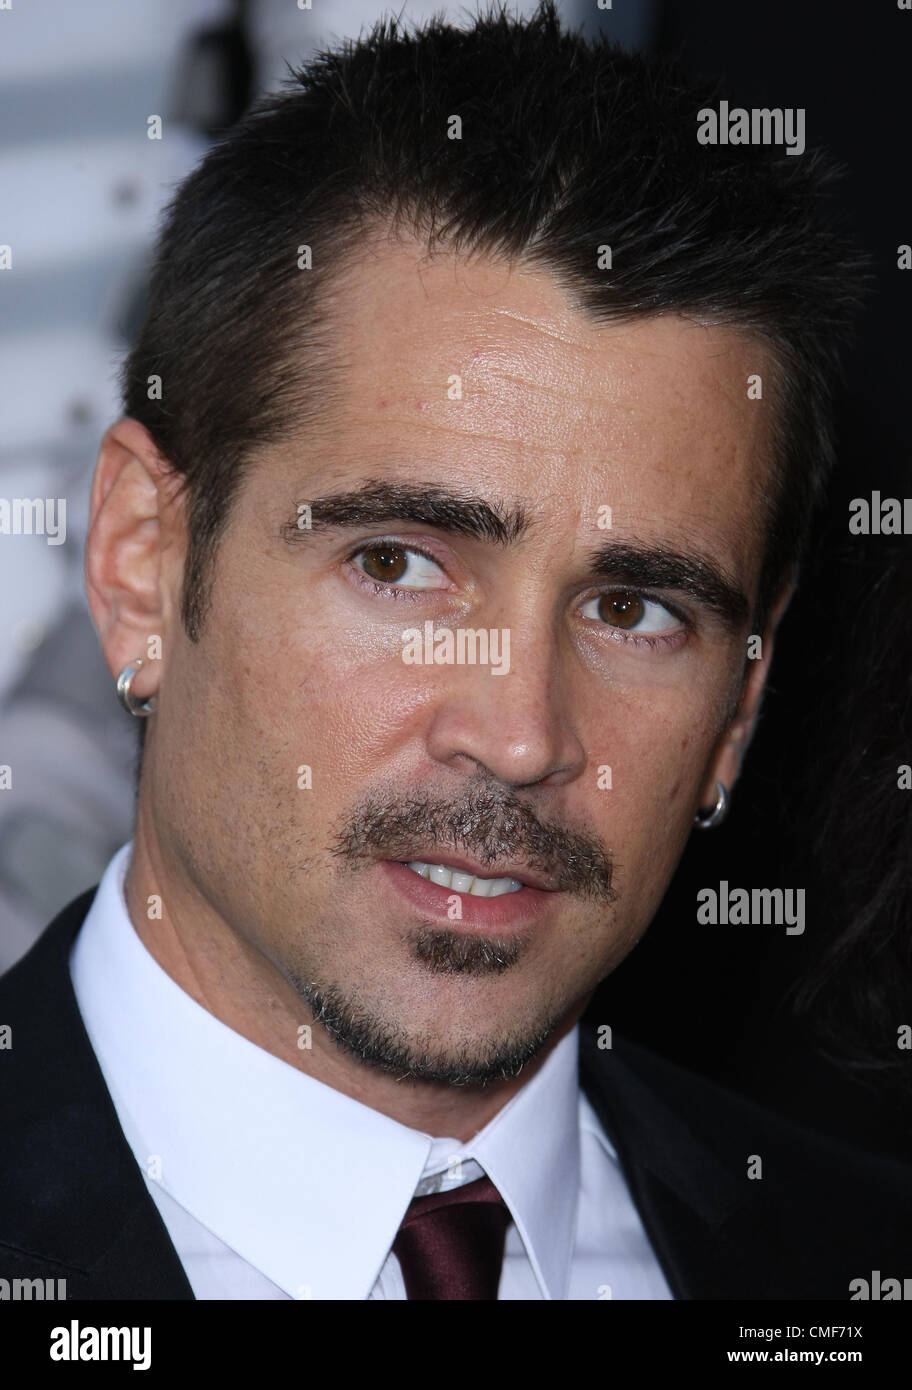 COLIN FARRELL TOTAL RECALL. PREMIERE HOLLYWOOD LOS ANGELES Kalifornien USA 1. August 2012 Stockfoto